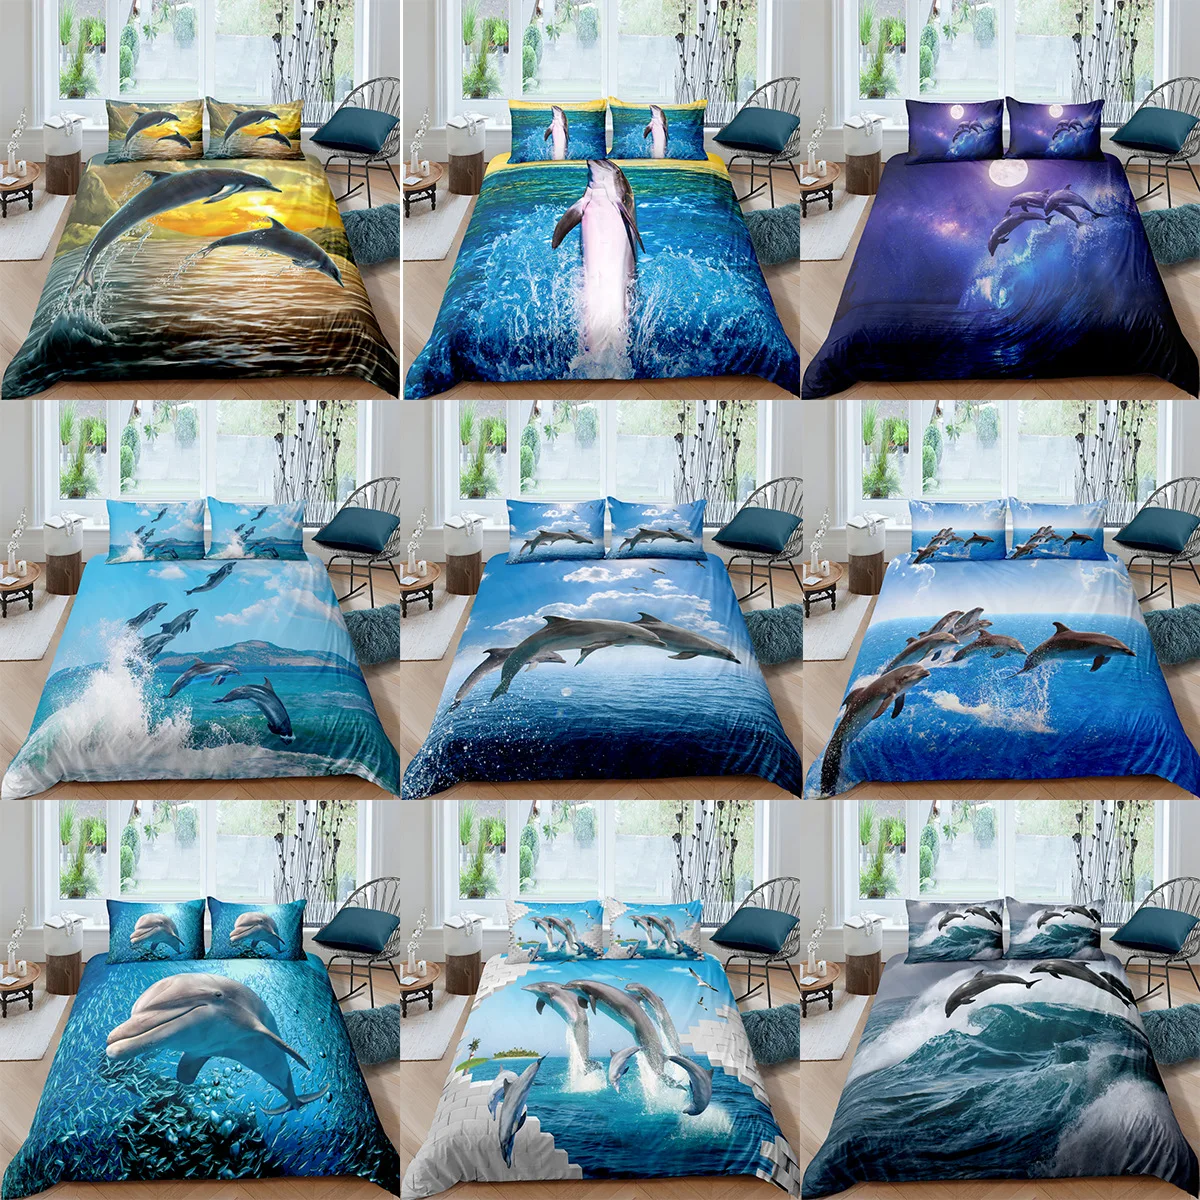 

Ocean Dolphin Bedding Set Twin Queen King Size Duvet Cover Set Quilt Cover Pillowcase Bed Set No Bed Sheets Bedclothes 2/3PC